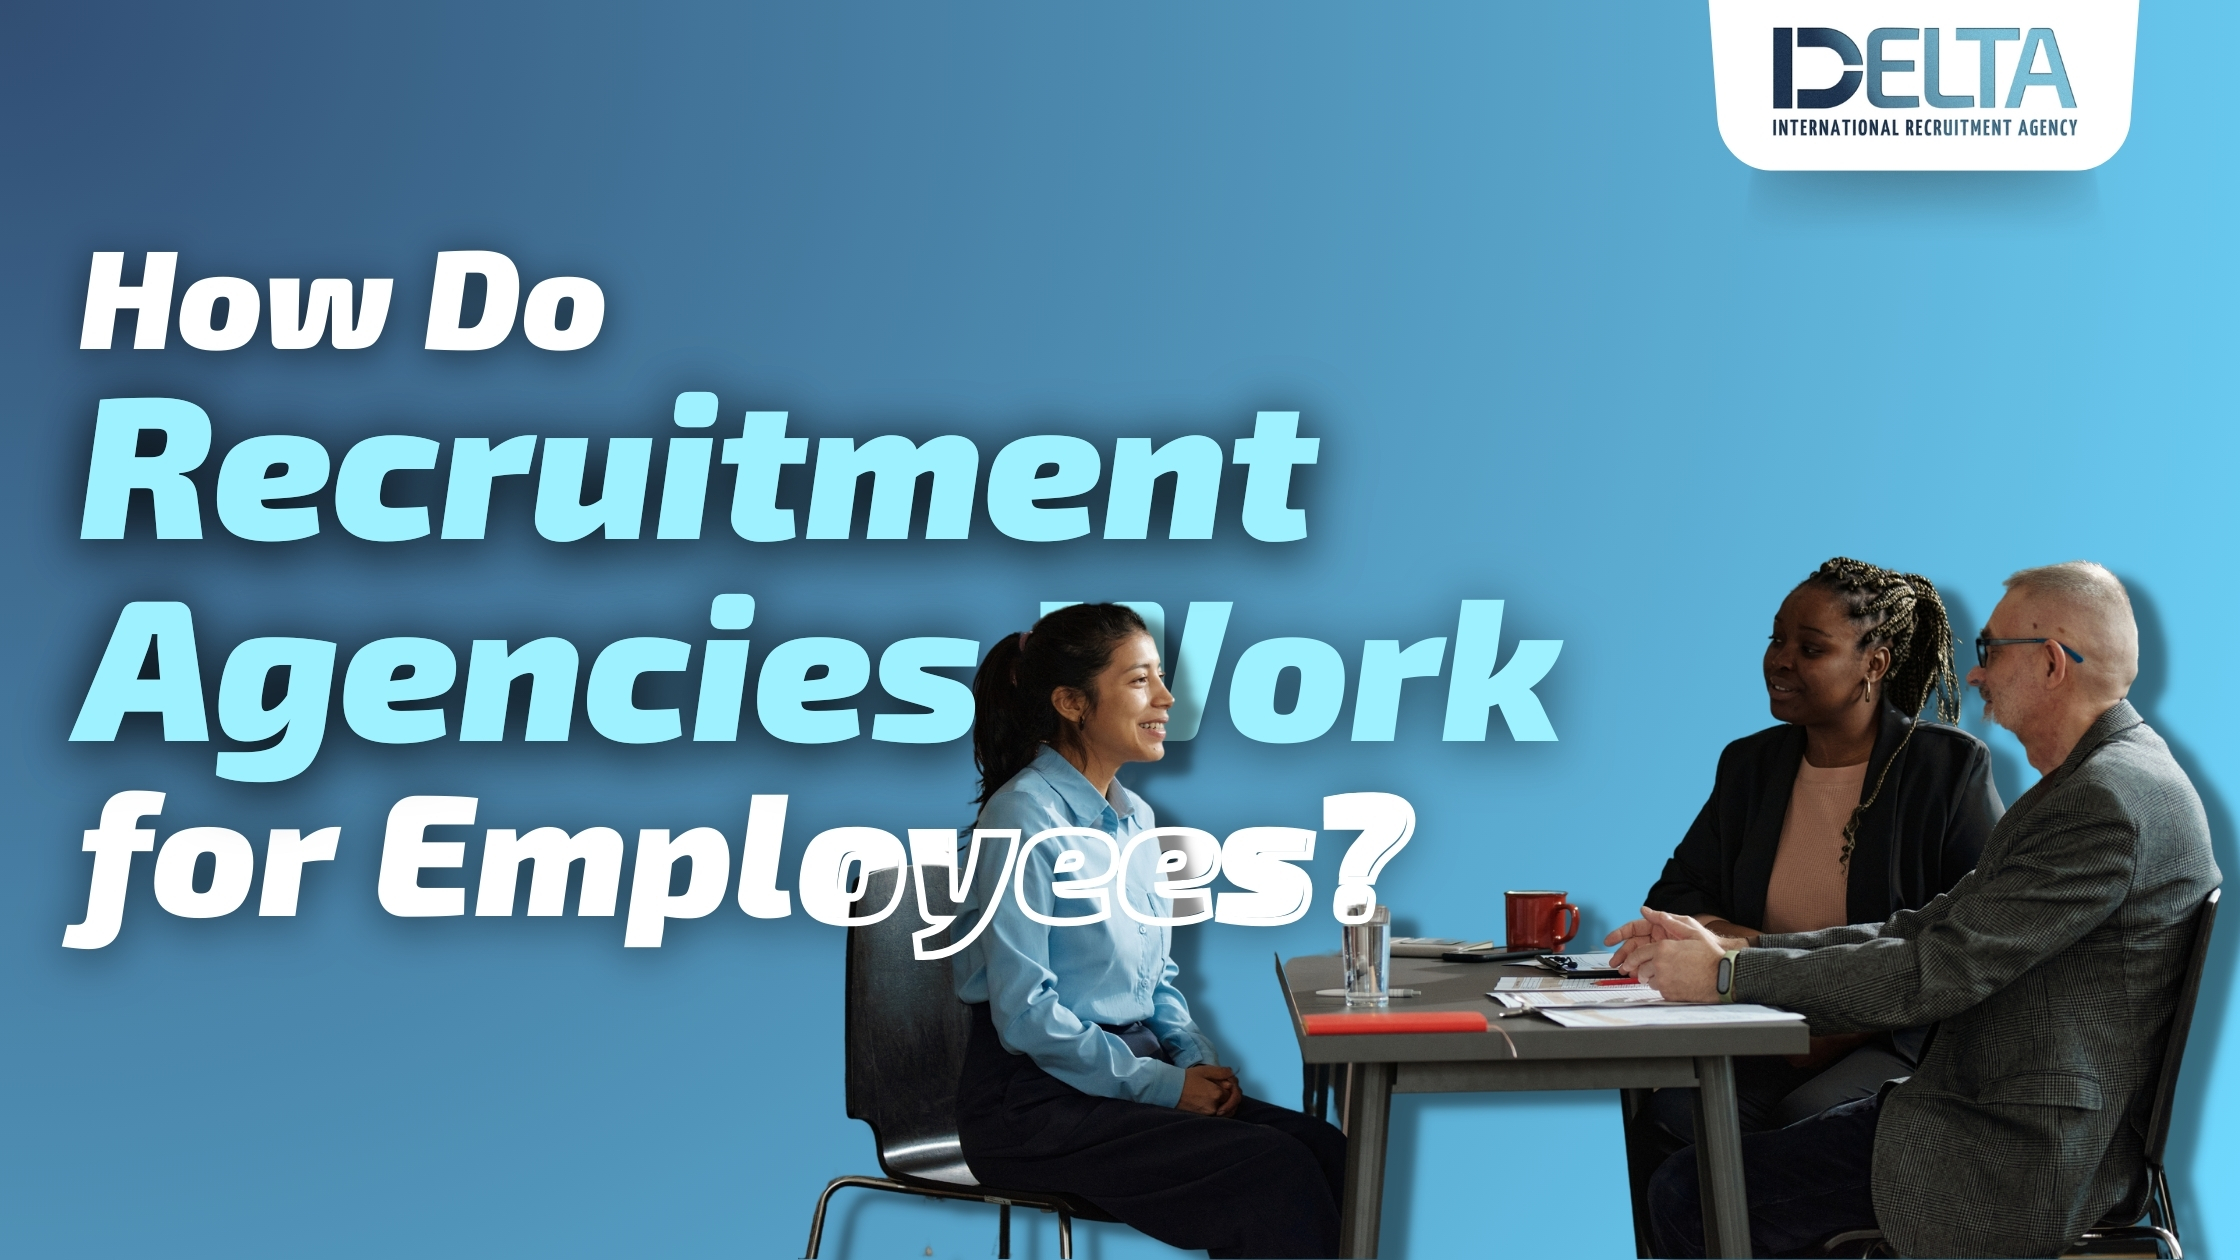 How Do Recruitment Agencies Work for Employees?